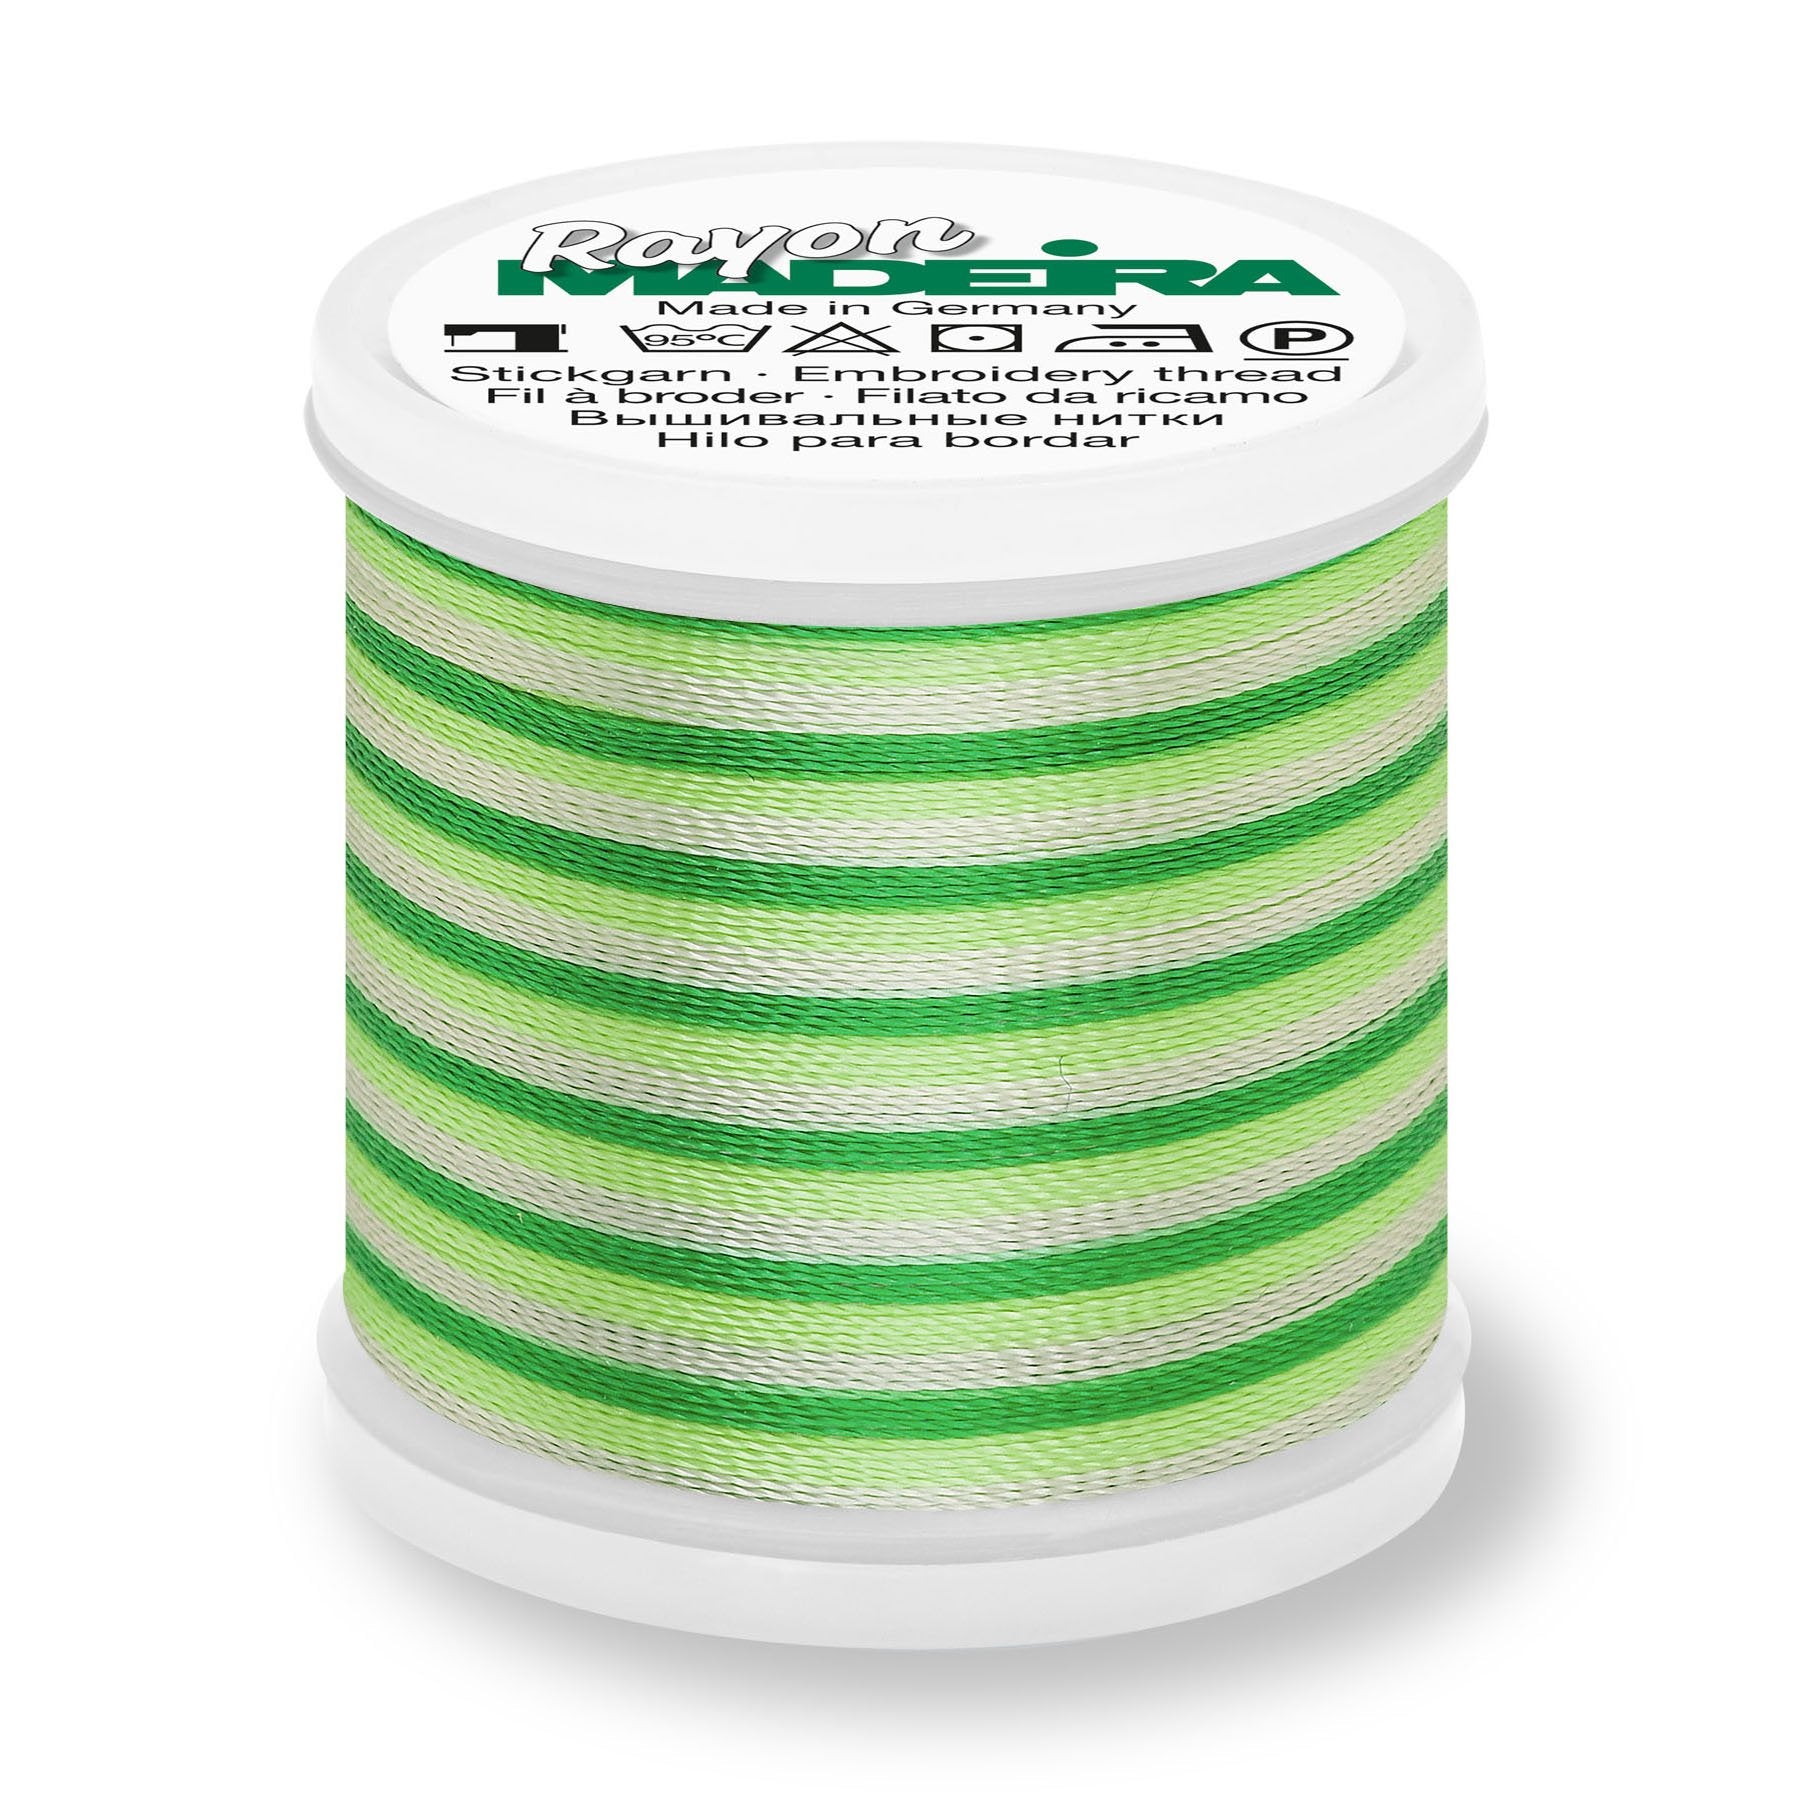 Madeira Rayon 40 Embroidery Thread 200m Multi #2031 Bright Greens from Jaycotts Sewing Supplies